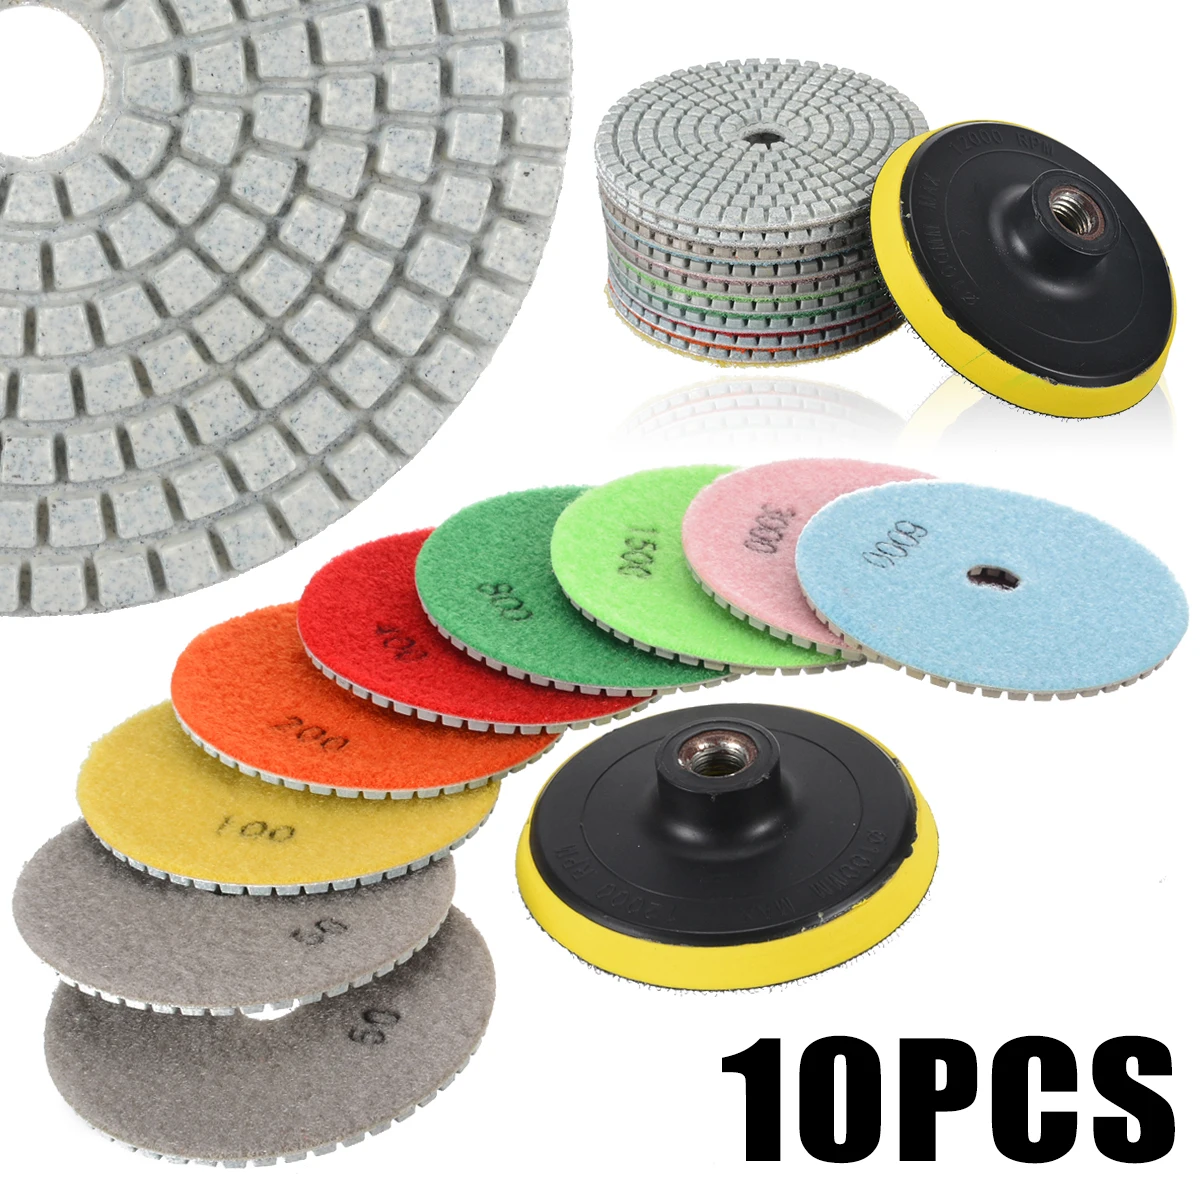 uxcell Diamond Polishing Sanding Grinding Pads Discs 4 Inch Grit 150 10 Pcs for Granite Concrete Stone Marble